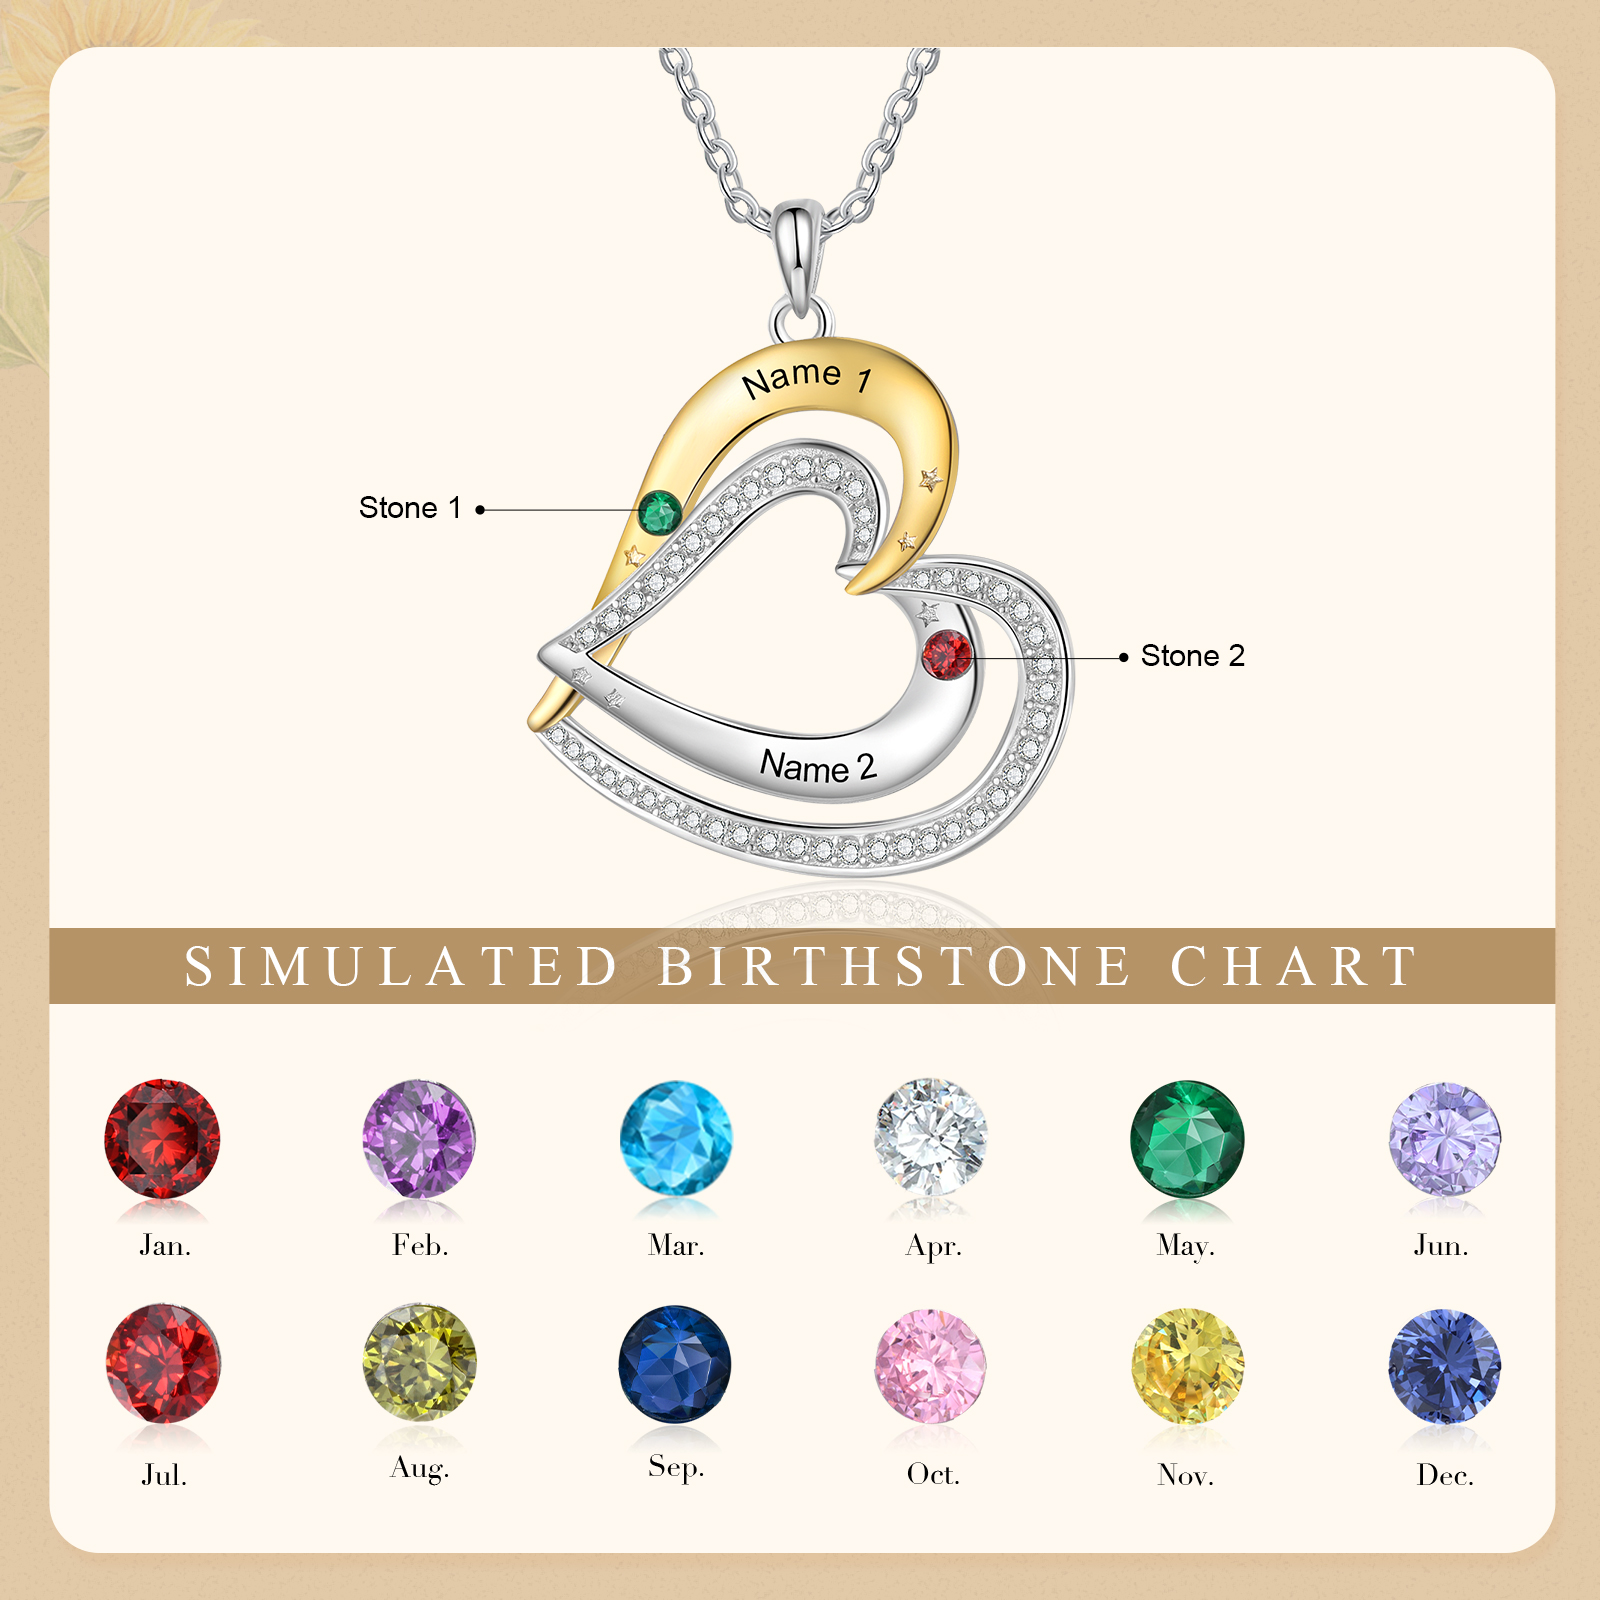 2 Names - Personalized Love Necklace with Customized Name and Birthstone, A Special Gift for Her